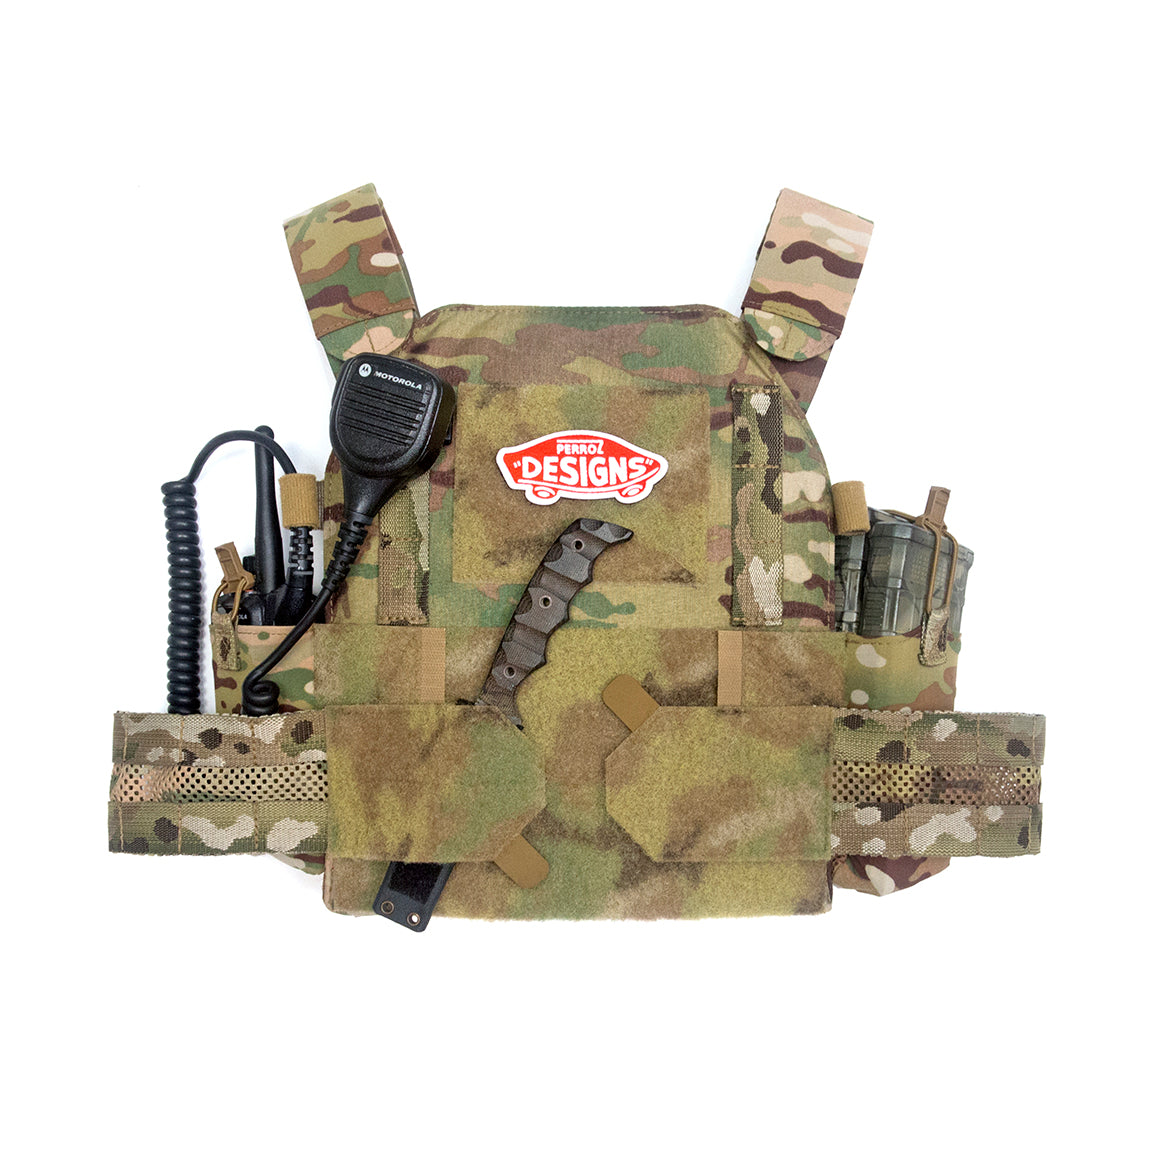 Plate Carrier Accessories Archives -The Firearm Blog